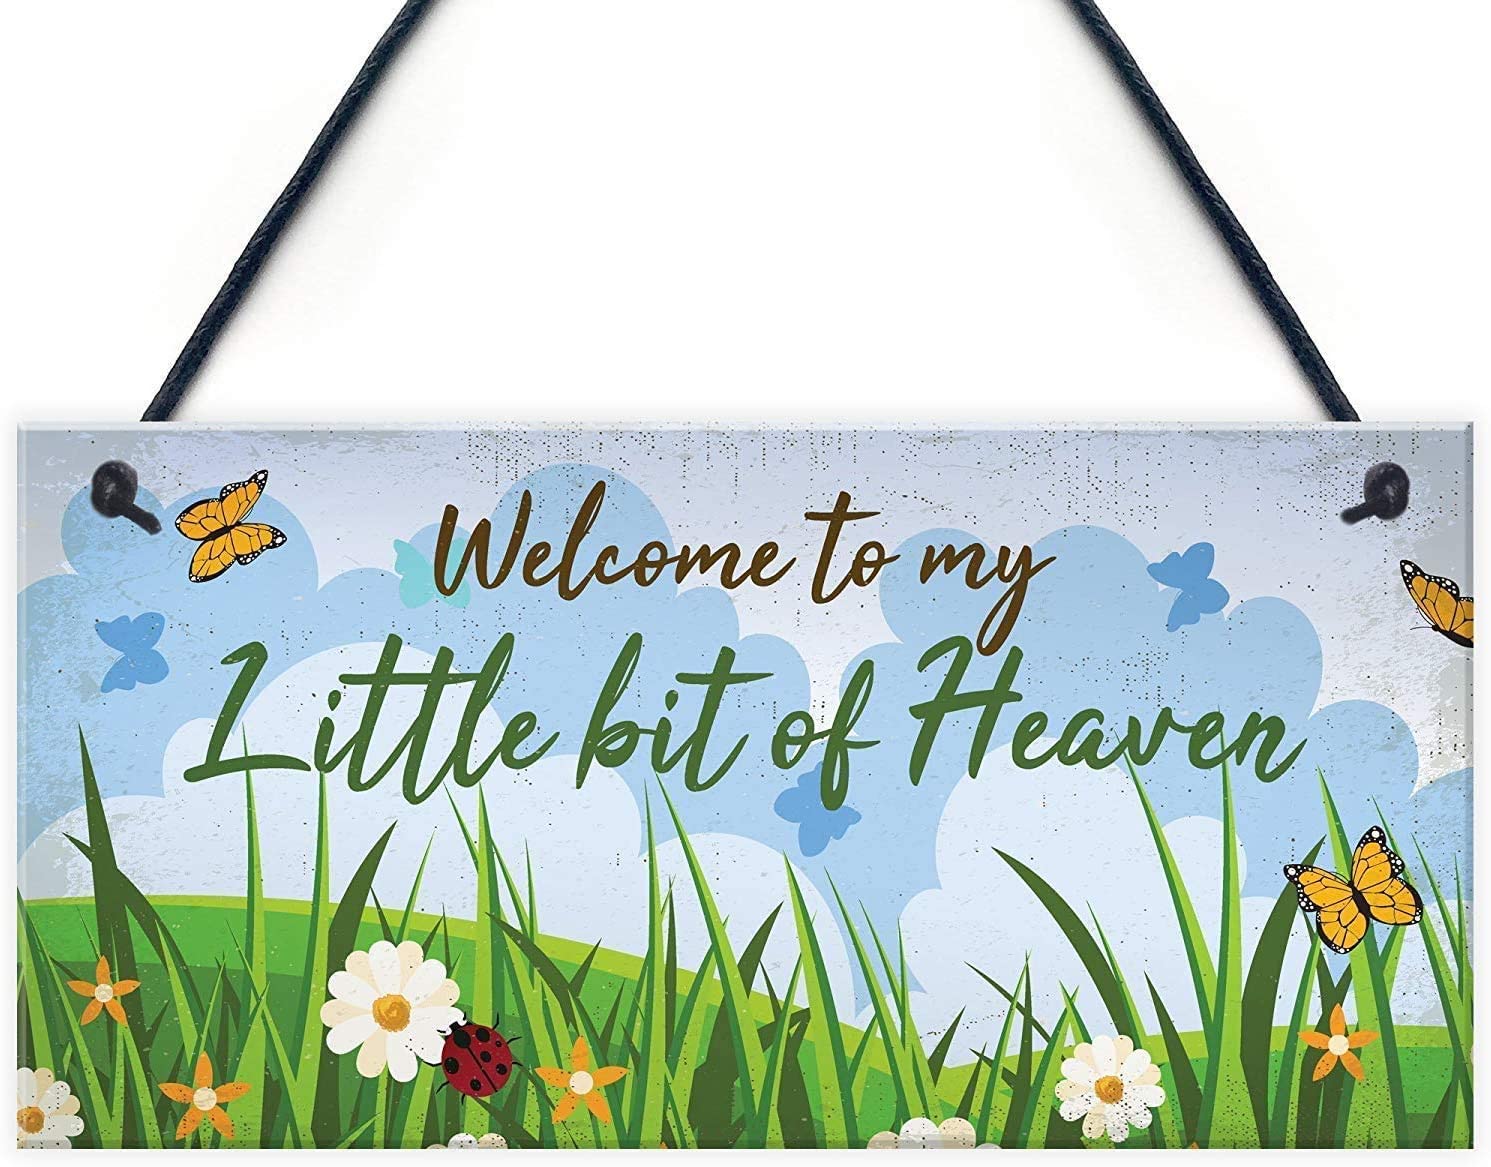 Welcome to My Little Bit of Heaven Hanging Garden Sign Shed Summerhouse Wood Plaque Nan Gifts for Her